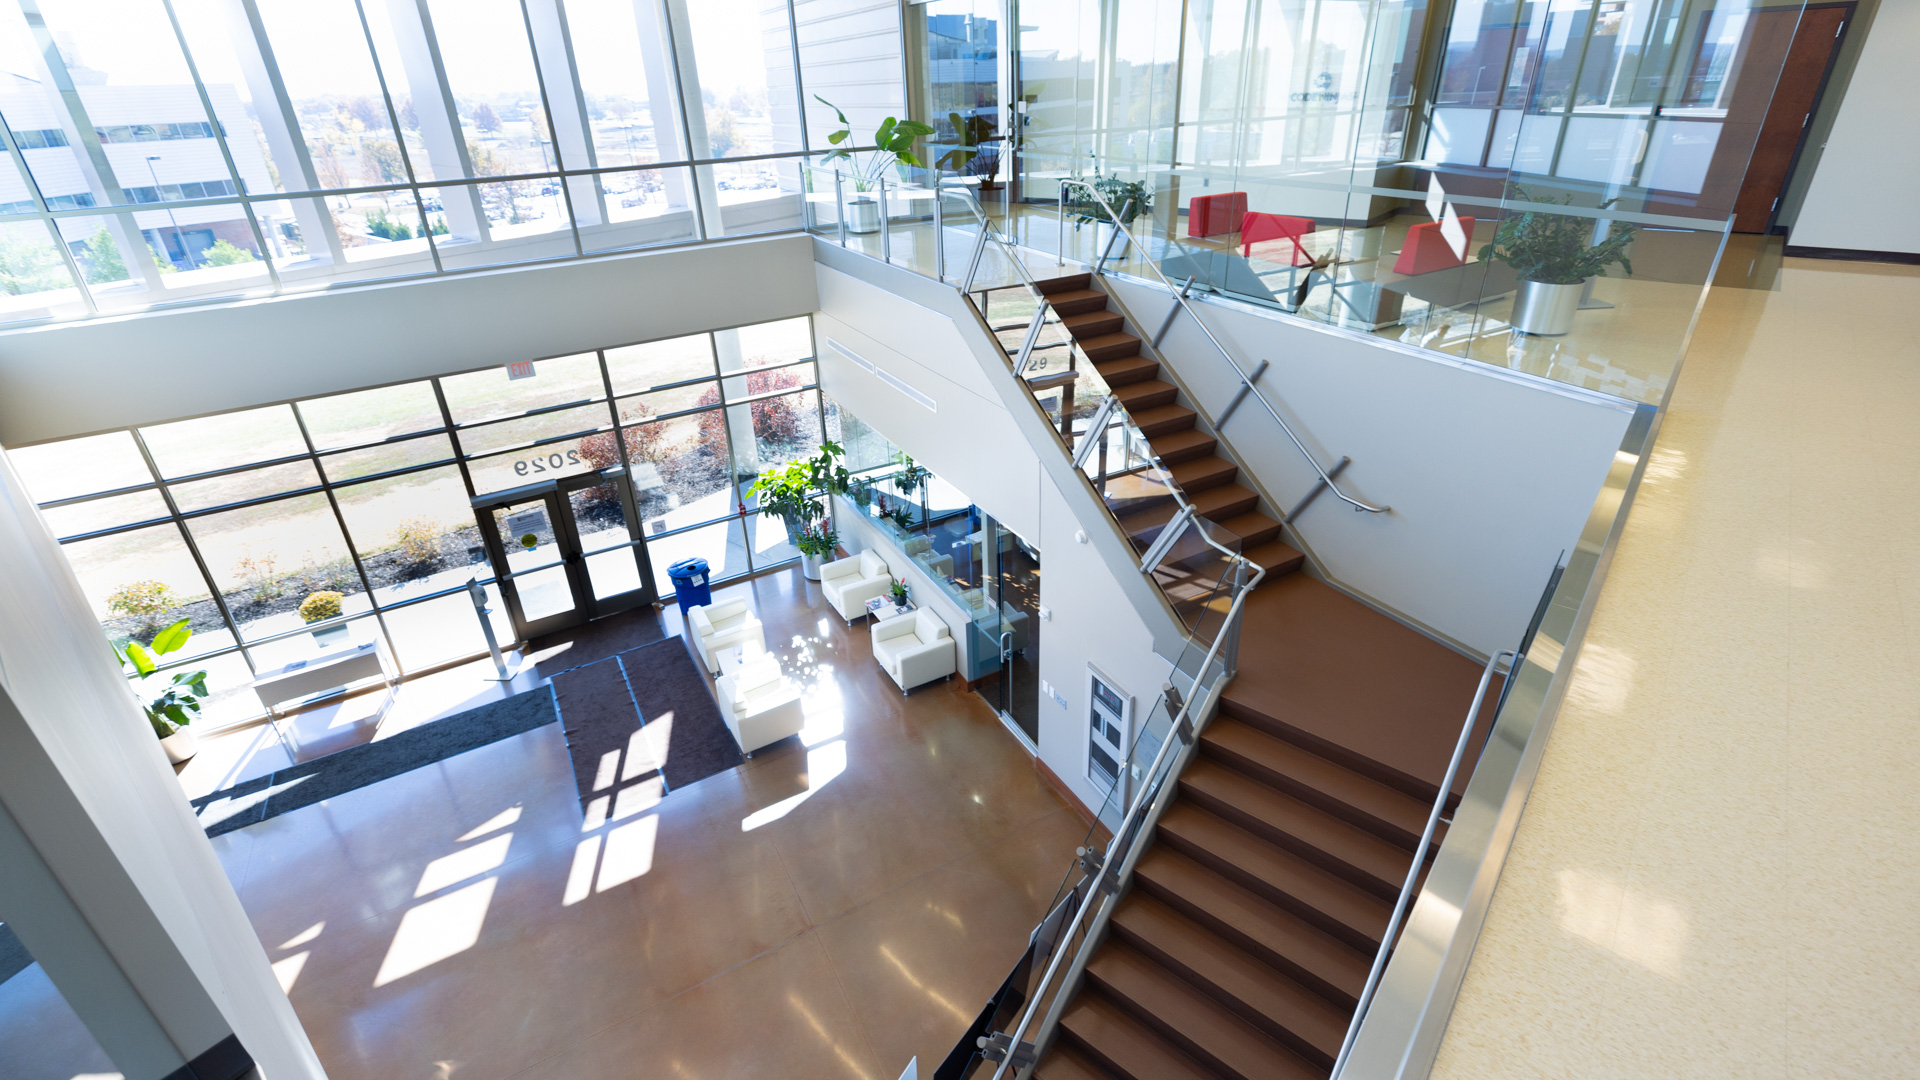 A long shot of the inside of the KU Innovation Center's Business Park in Lawrence from the second floor.